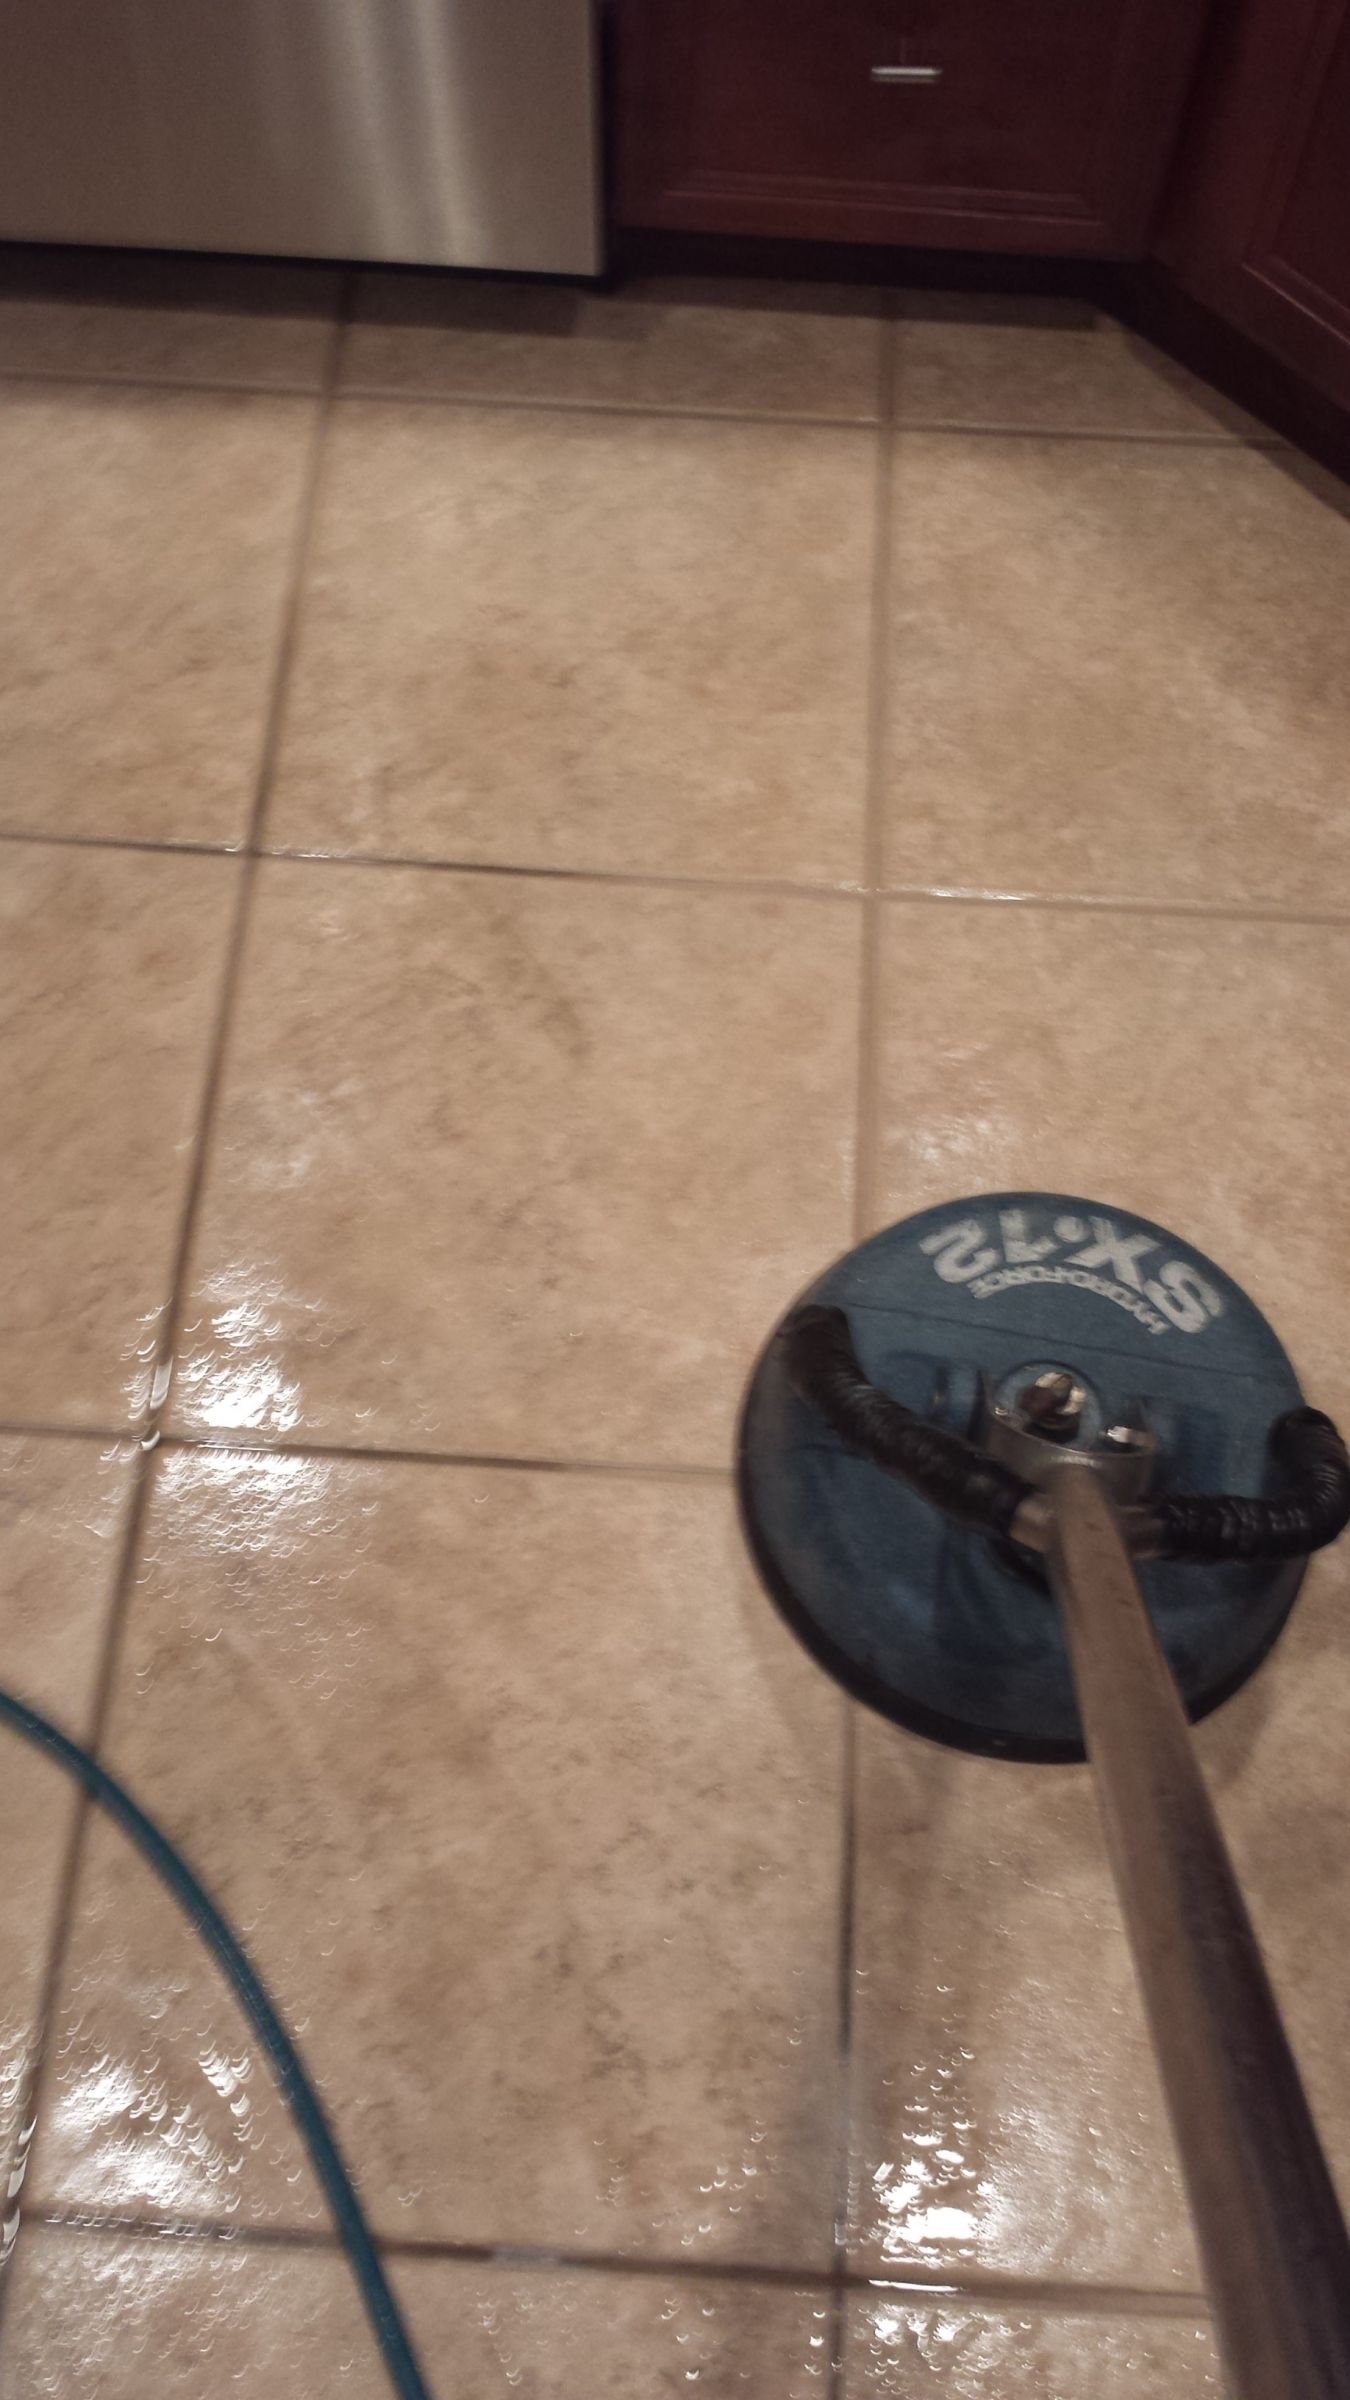 Professional Blackwood Tile and Grout Cleaning Services